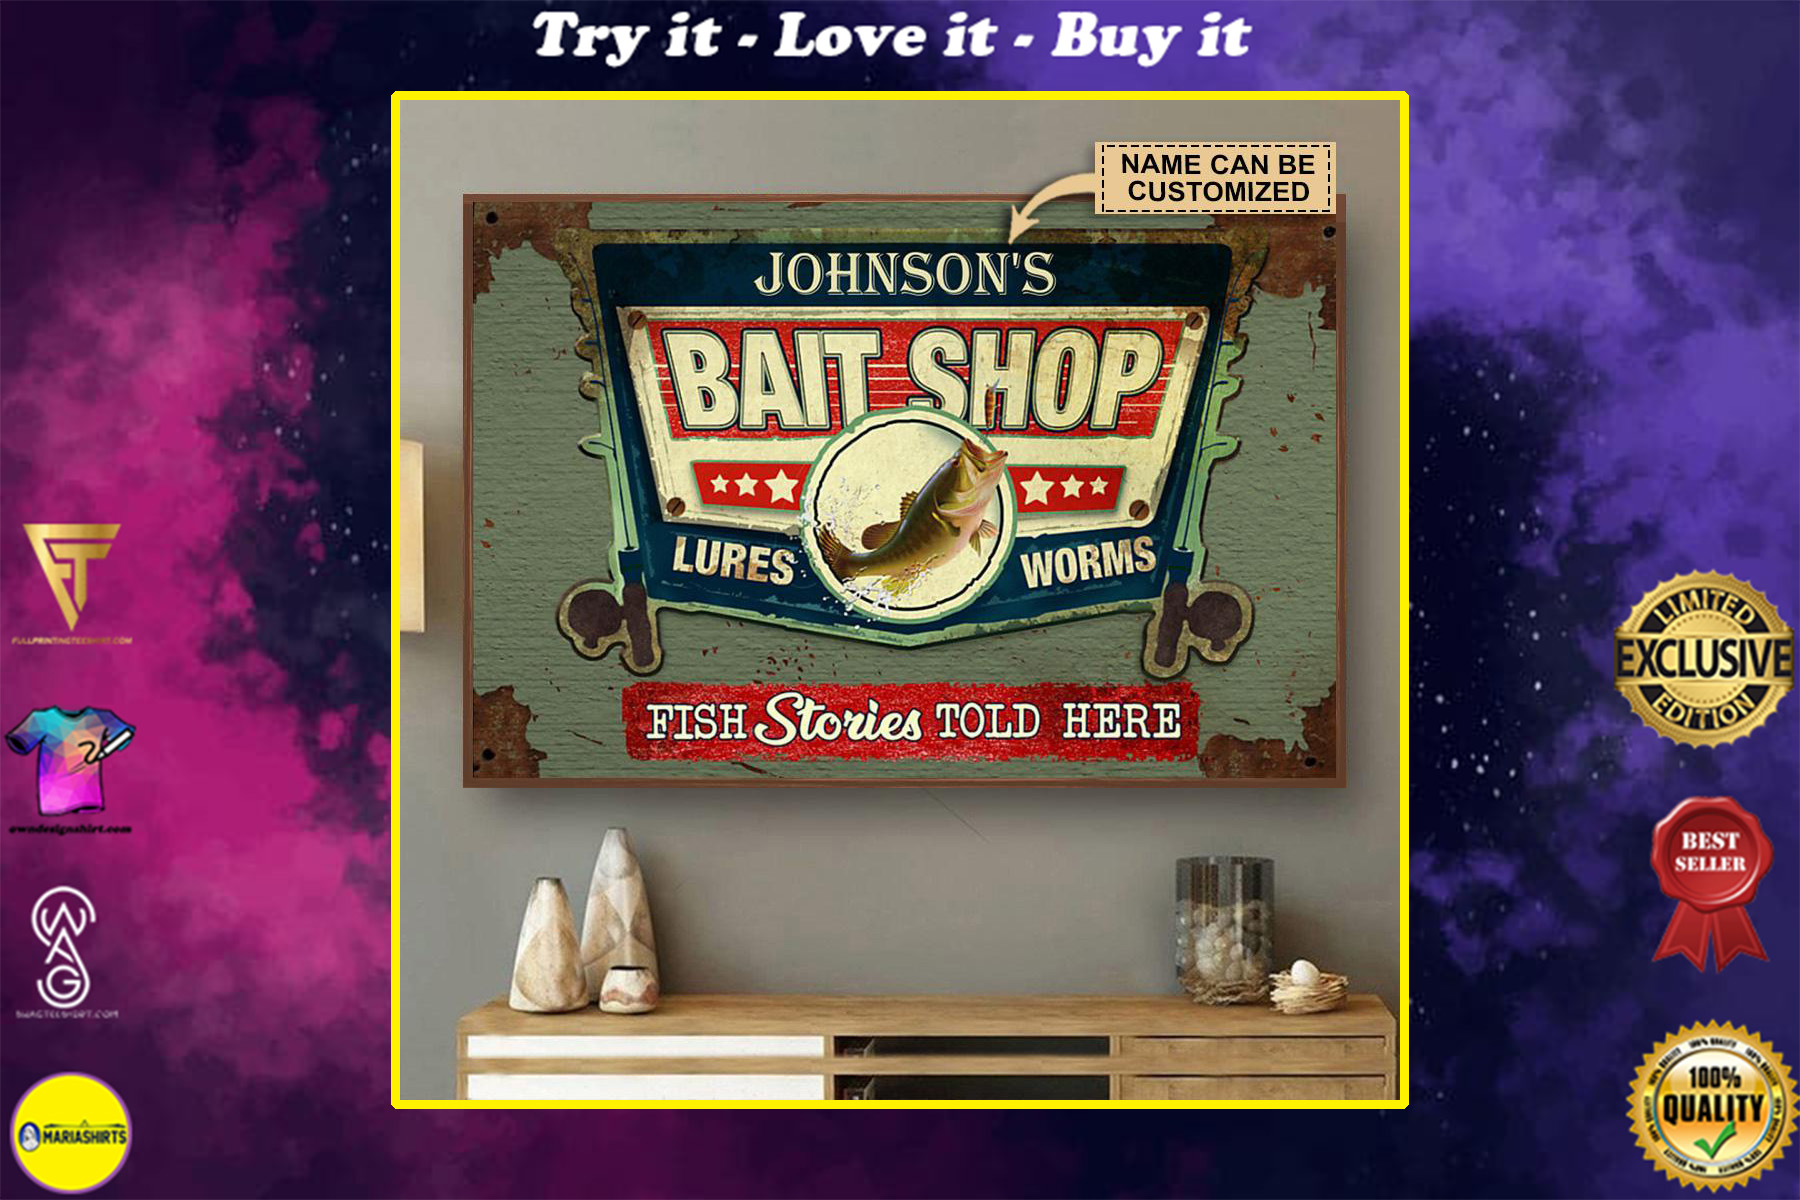 custom your name bait shop fish stories told here vintage poster